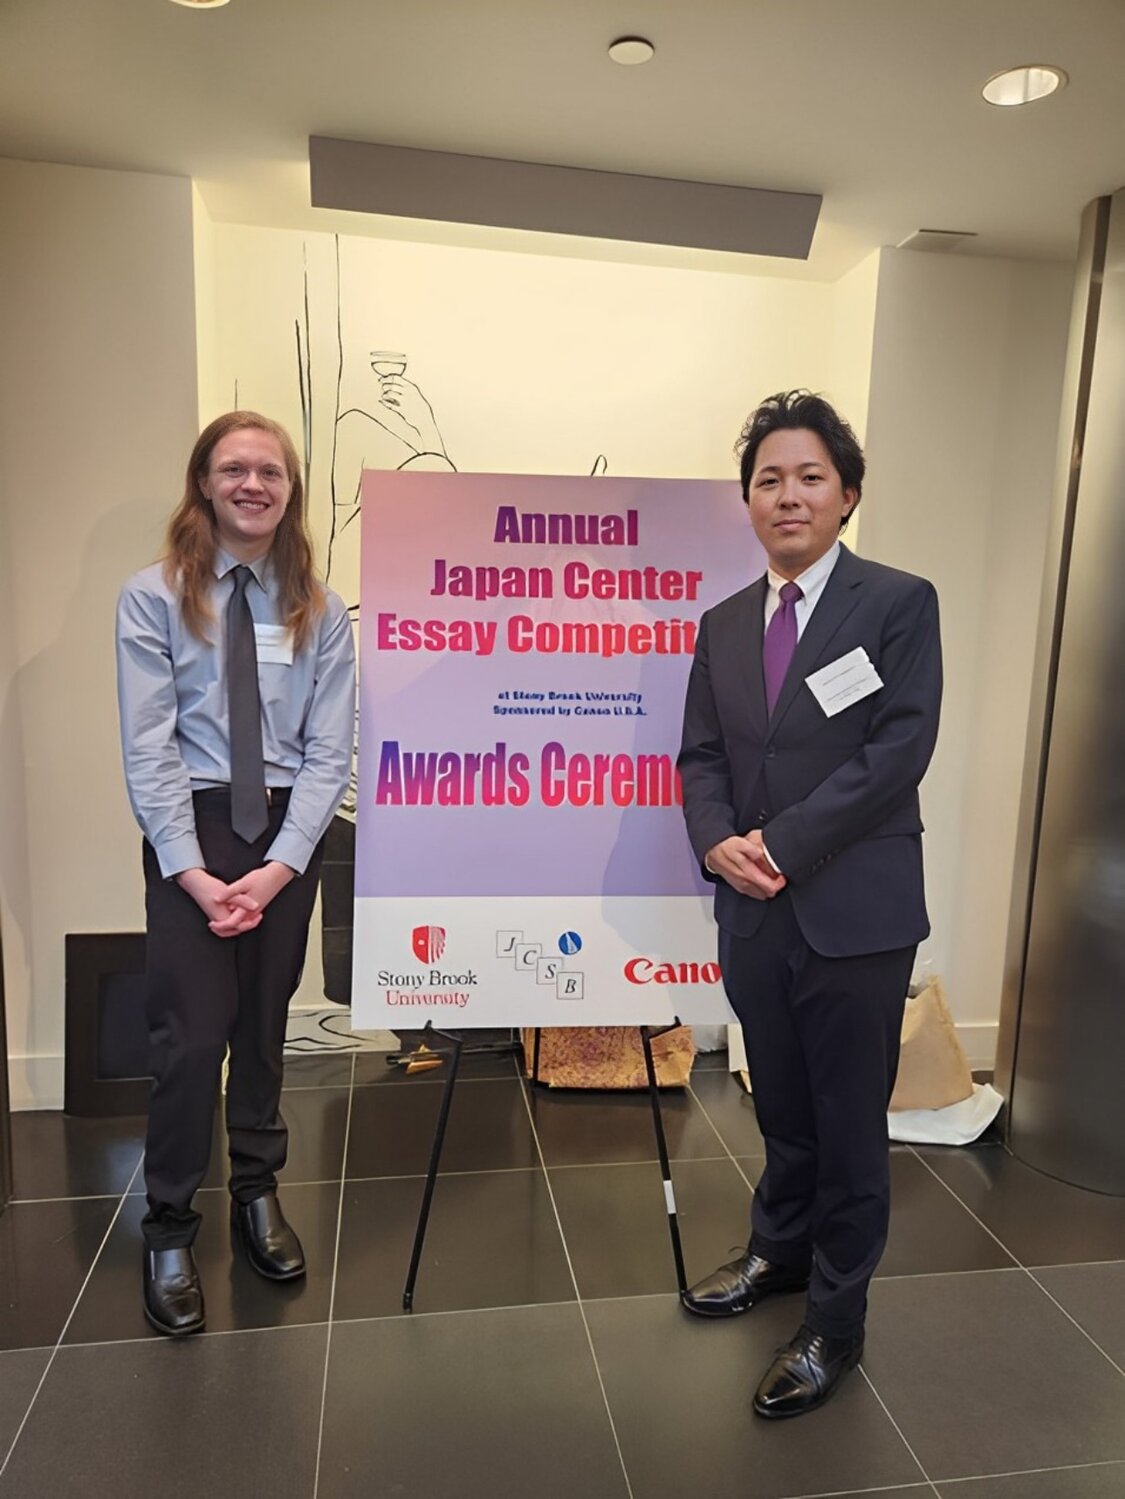 Aiden Sargent, a 12th-grader, won Stony Brook University’s Japan Center essay competition, as well as the Consul General of Japan Special Award. He stands here with Consul Satoshi Nagano from the Consulate General of Japan in New York.